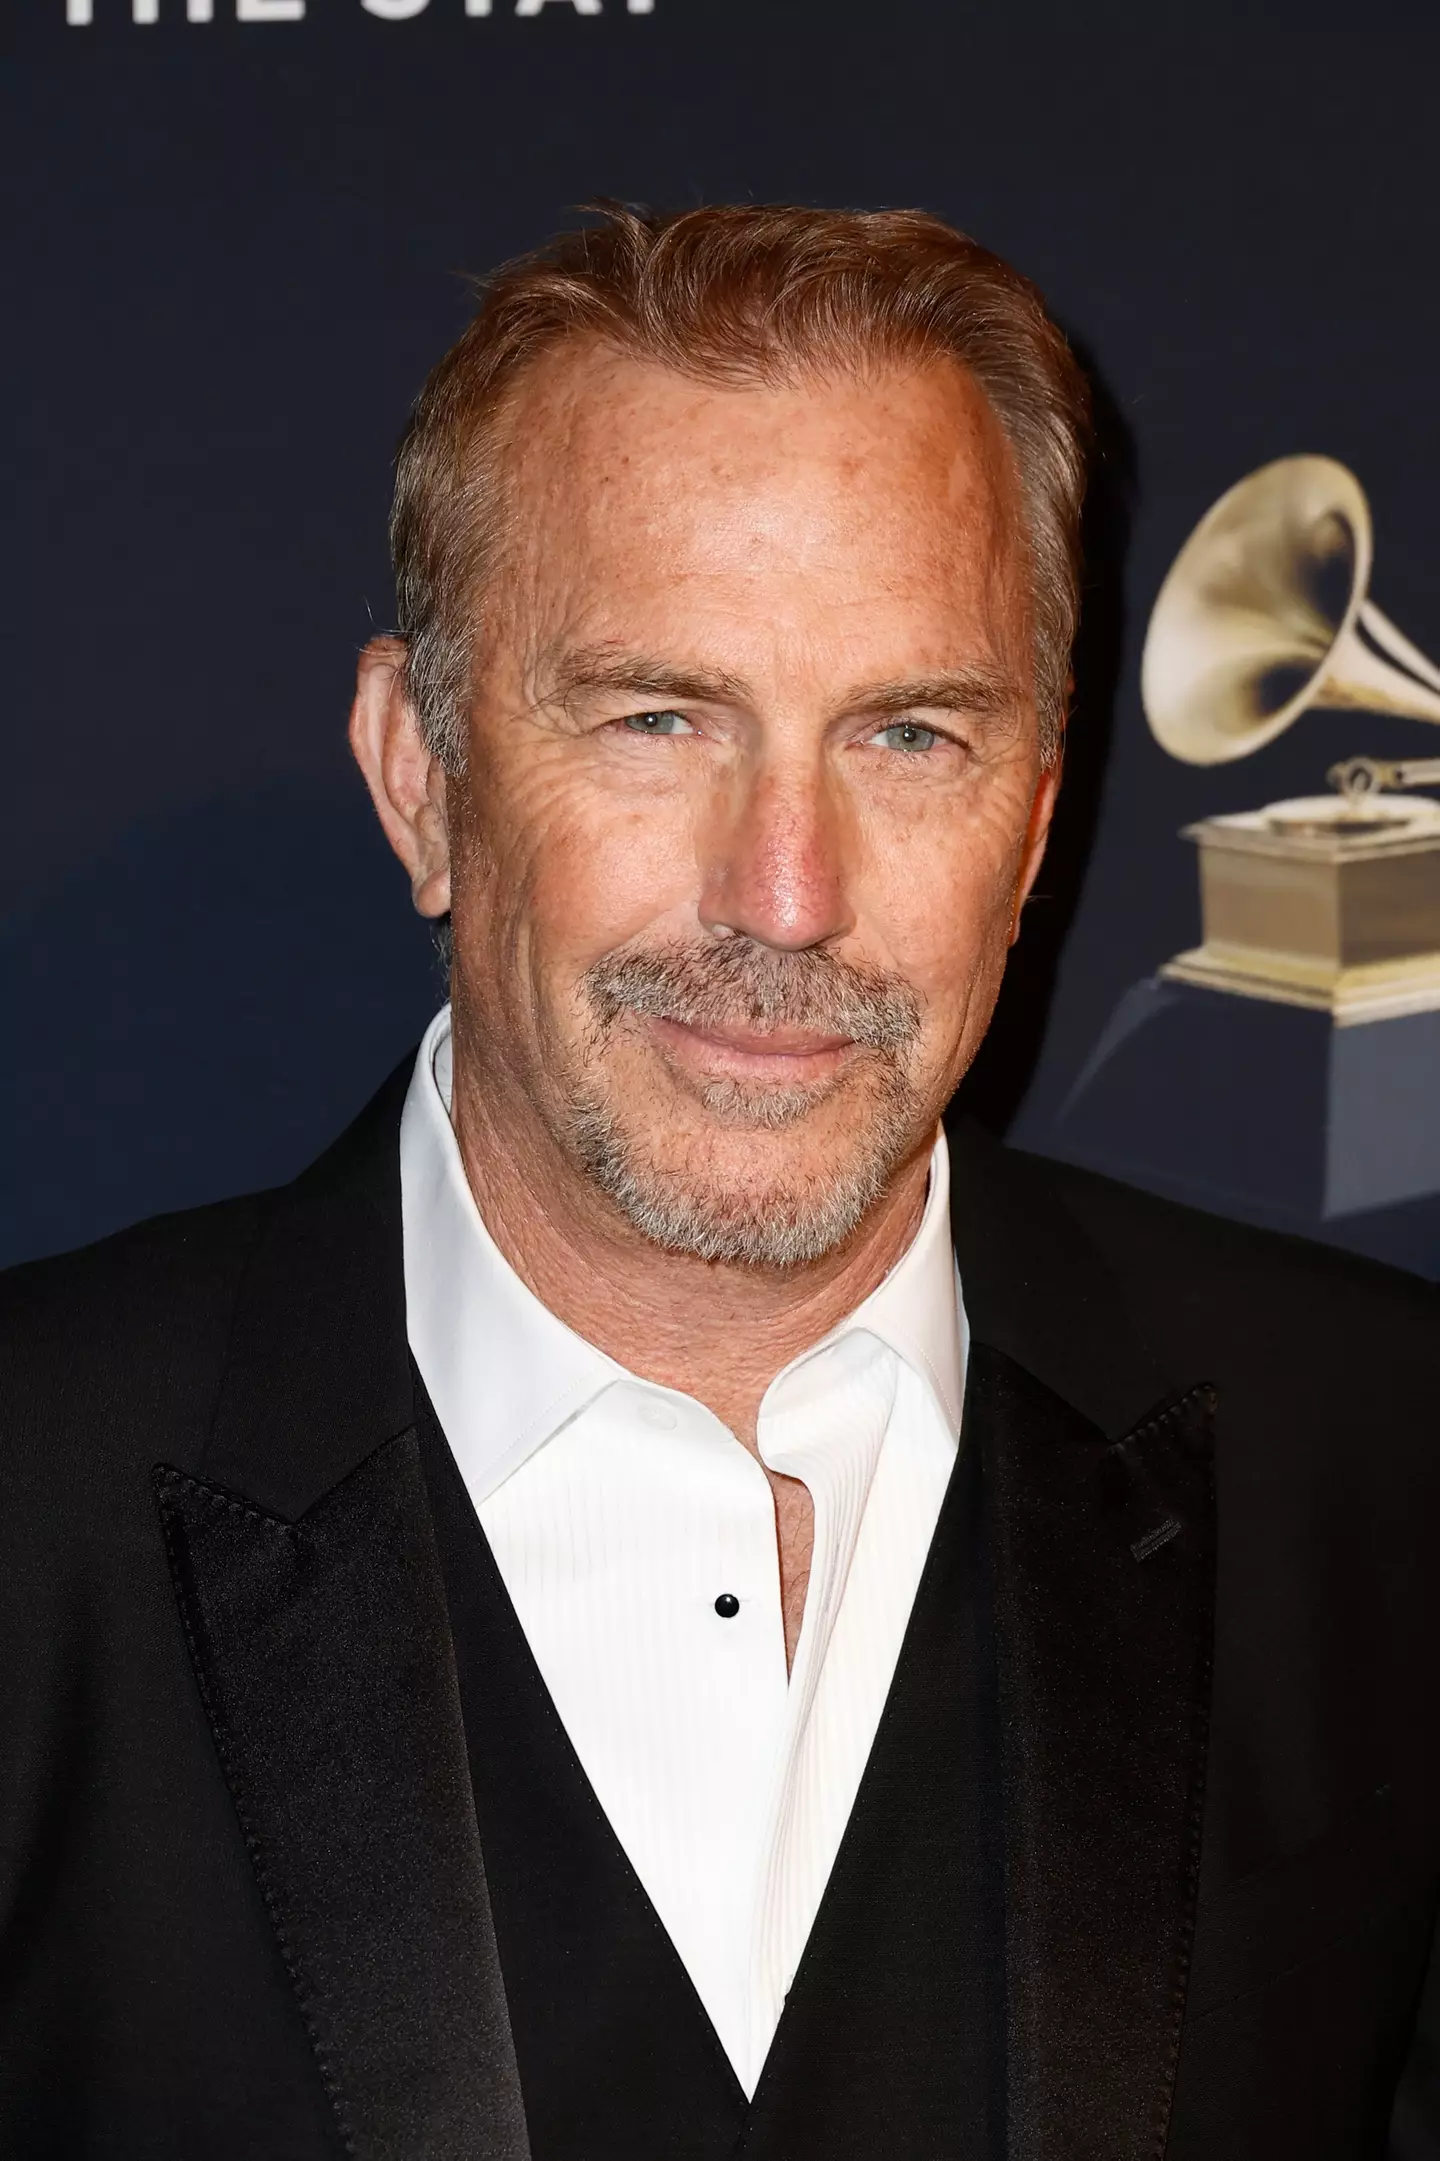 Kevin Costner claimed in court he didn't want to be forced to take on work he didn't want.